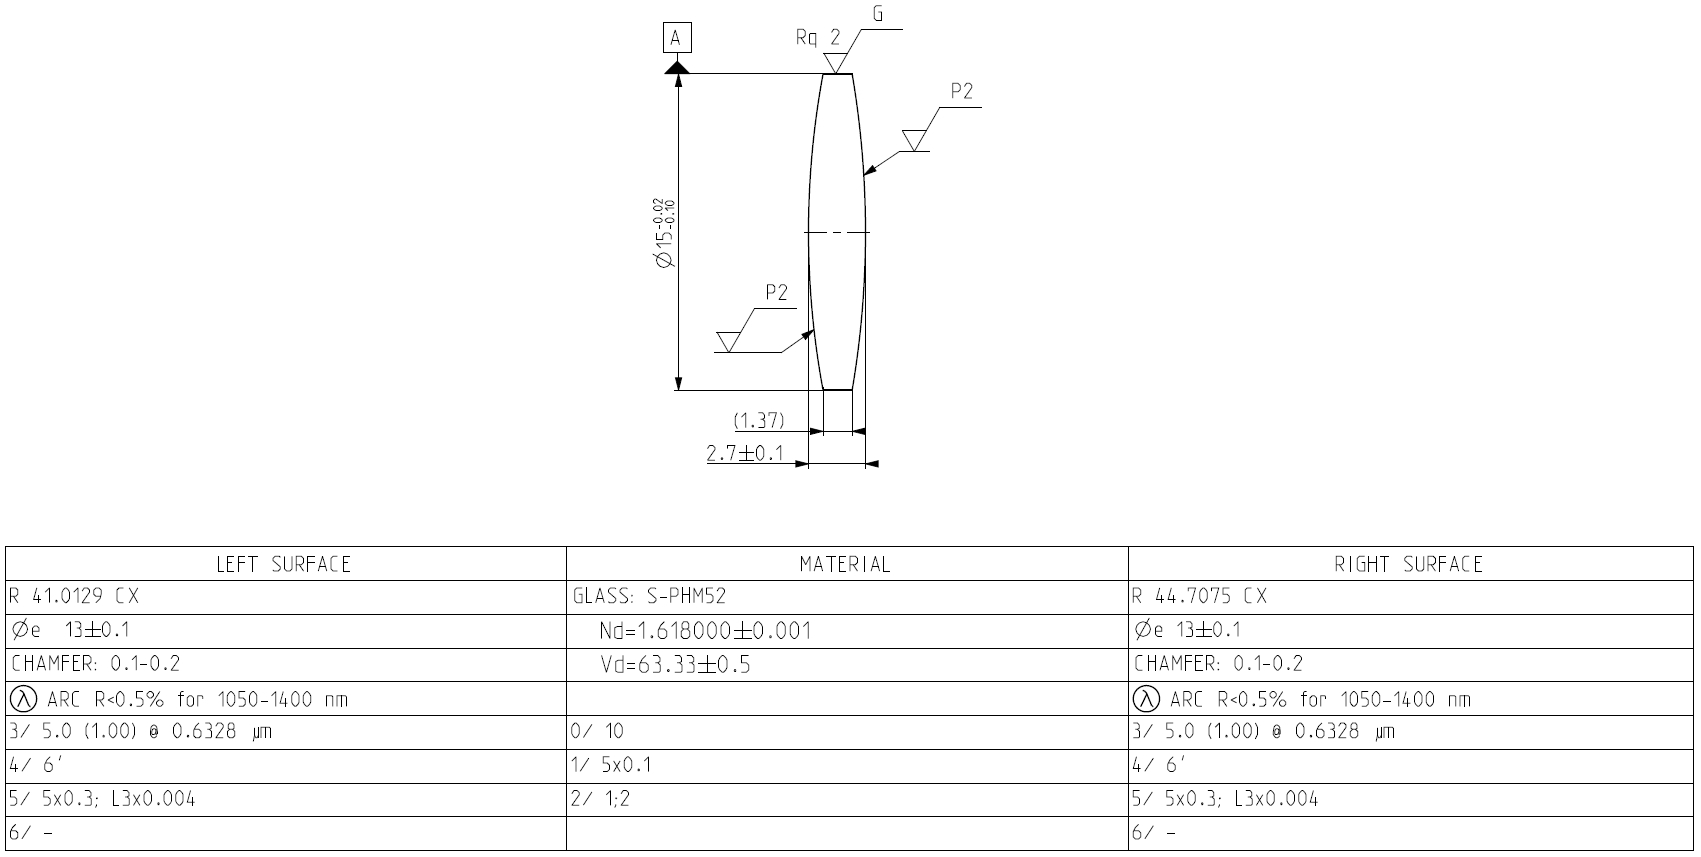 How to read an optics production drawing 1